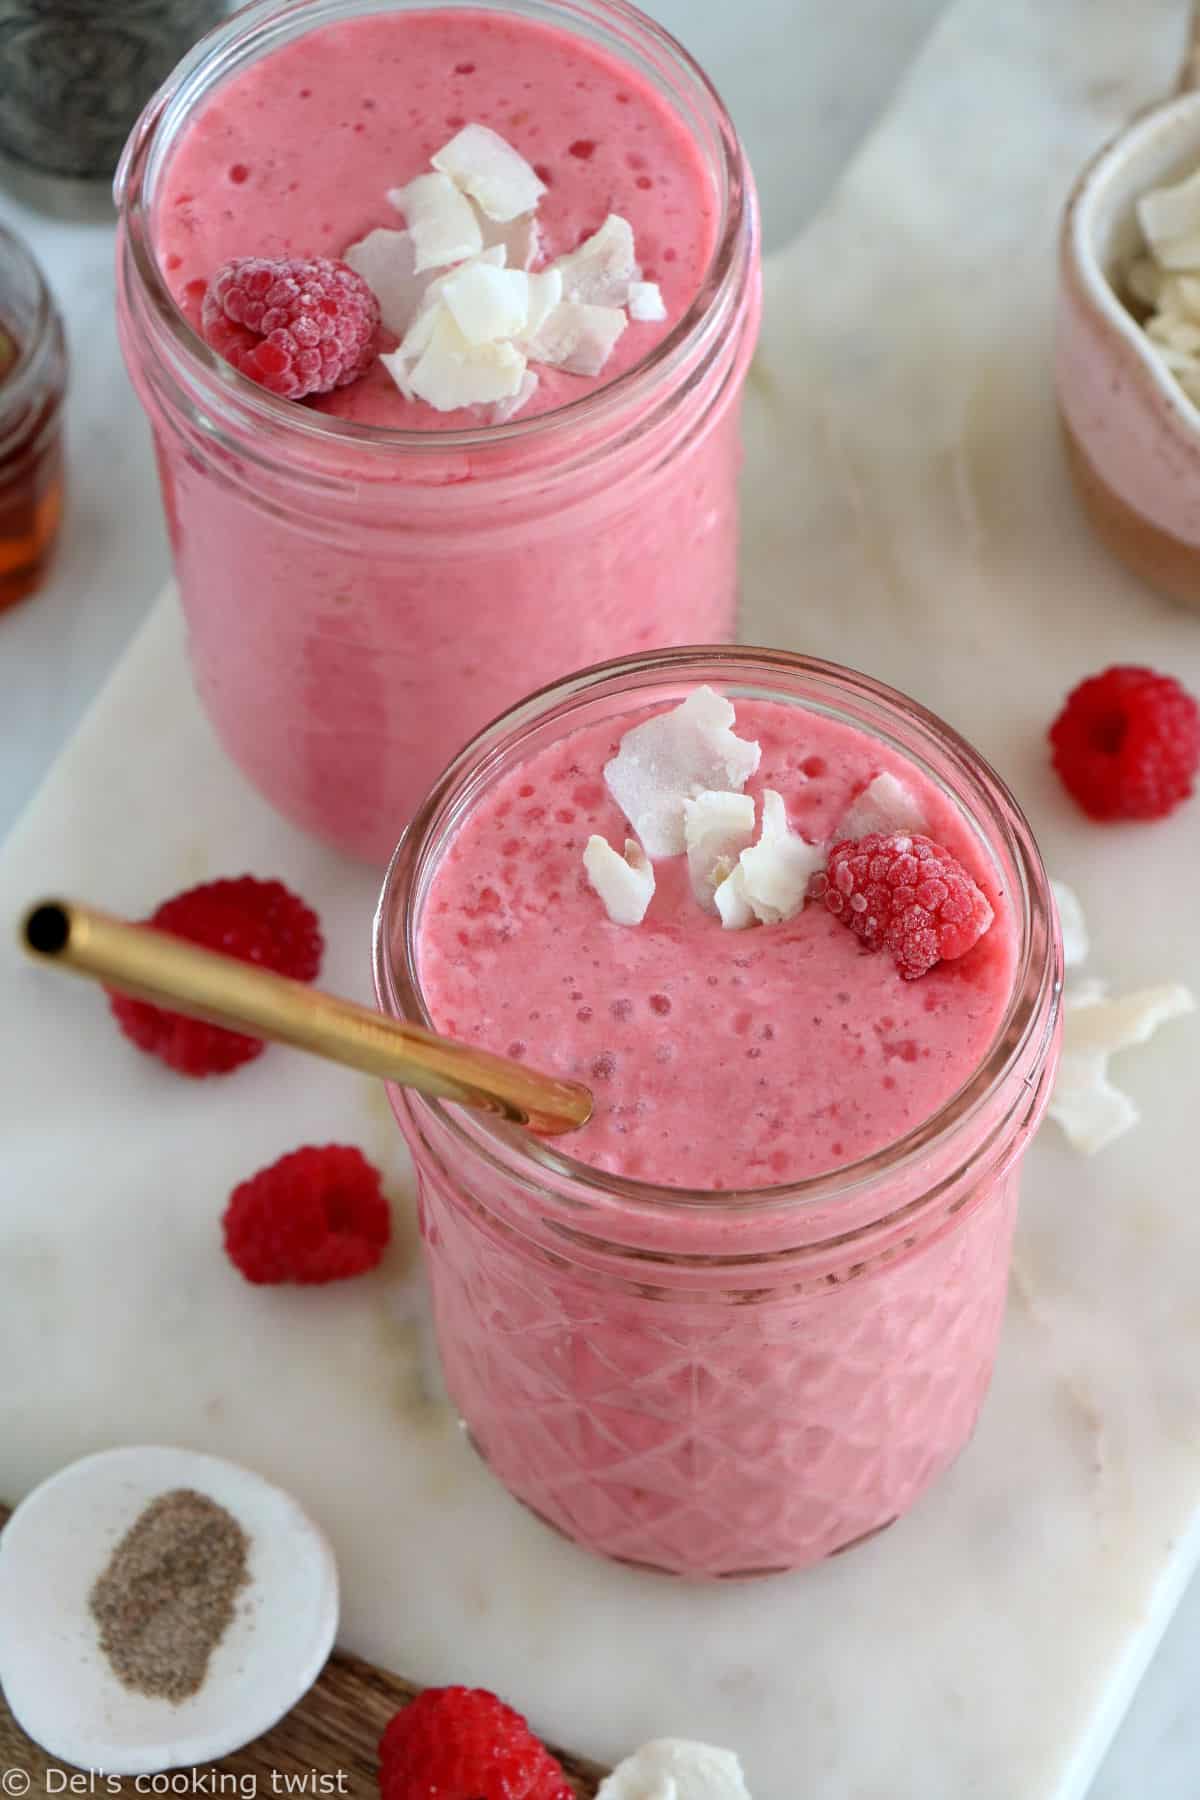 This beautiful raspberry coconut smoothie is deliciously sweet and tart at the same time, with a subtle tropical touch brought by the coconut milk. A quick, healthy smoothie, with a vibrant color.